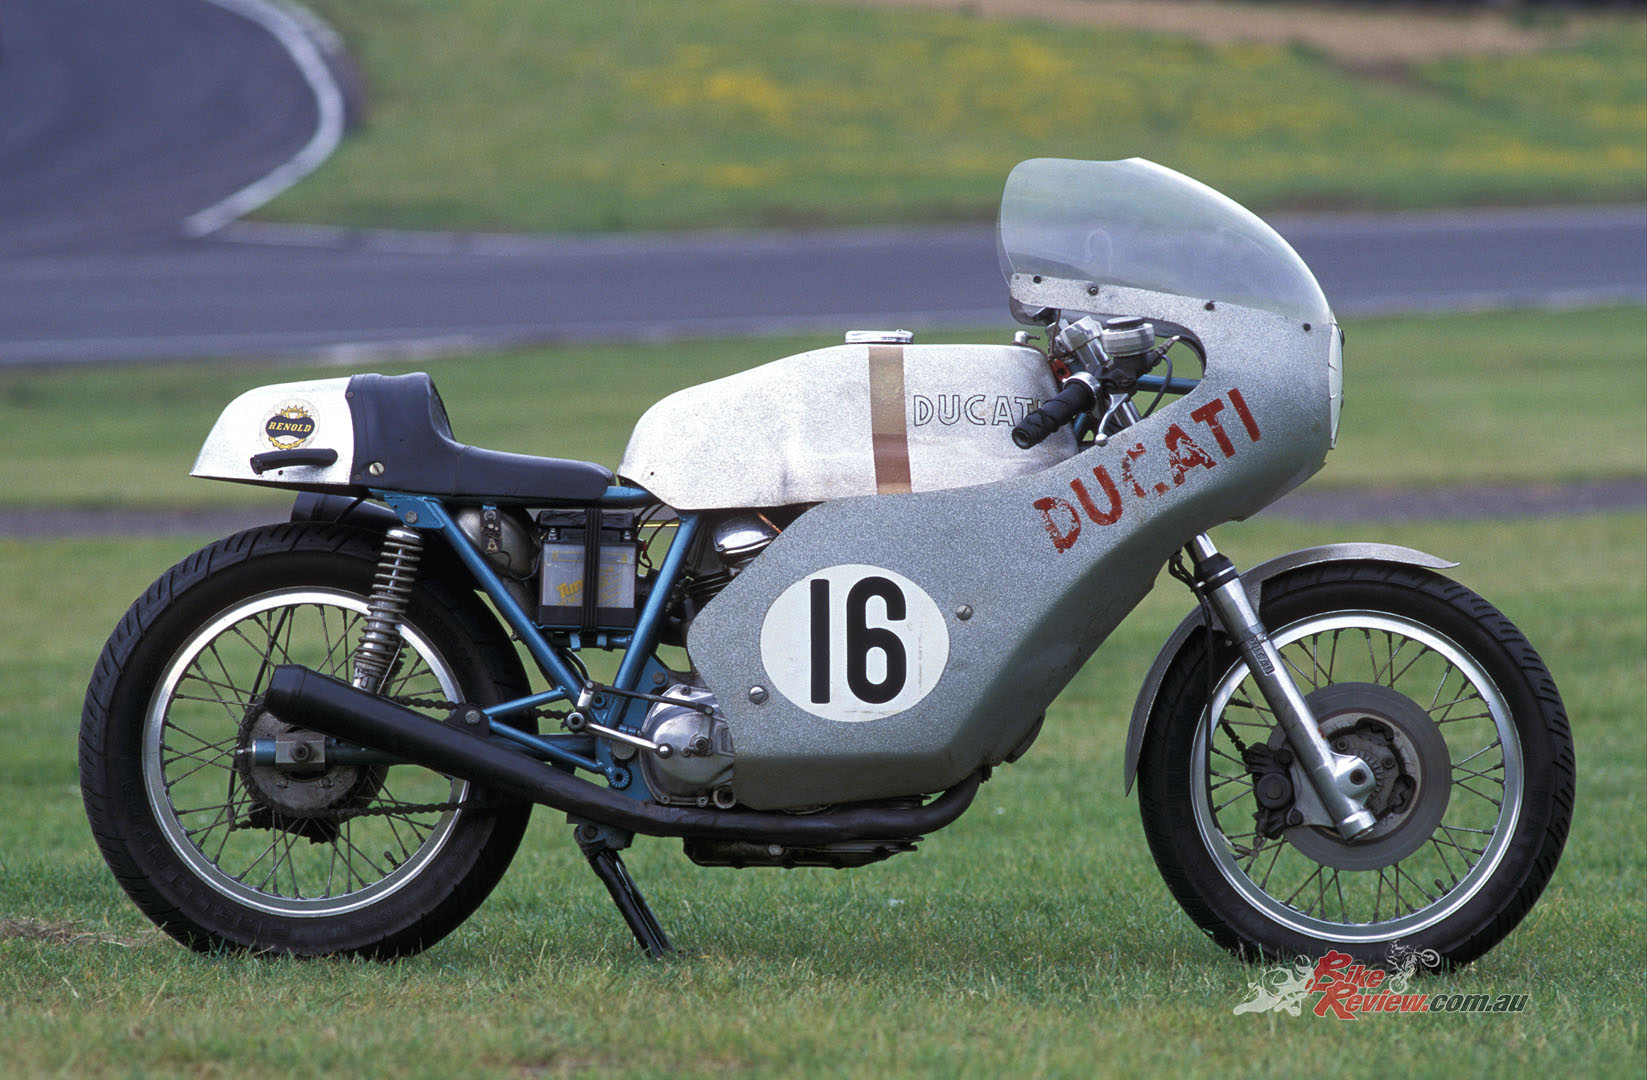 Smart got to keep the Imola 200 winning Ducati. Alan rode the important part of Ducati history years later, you can read about it in his racer test!